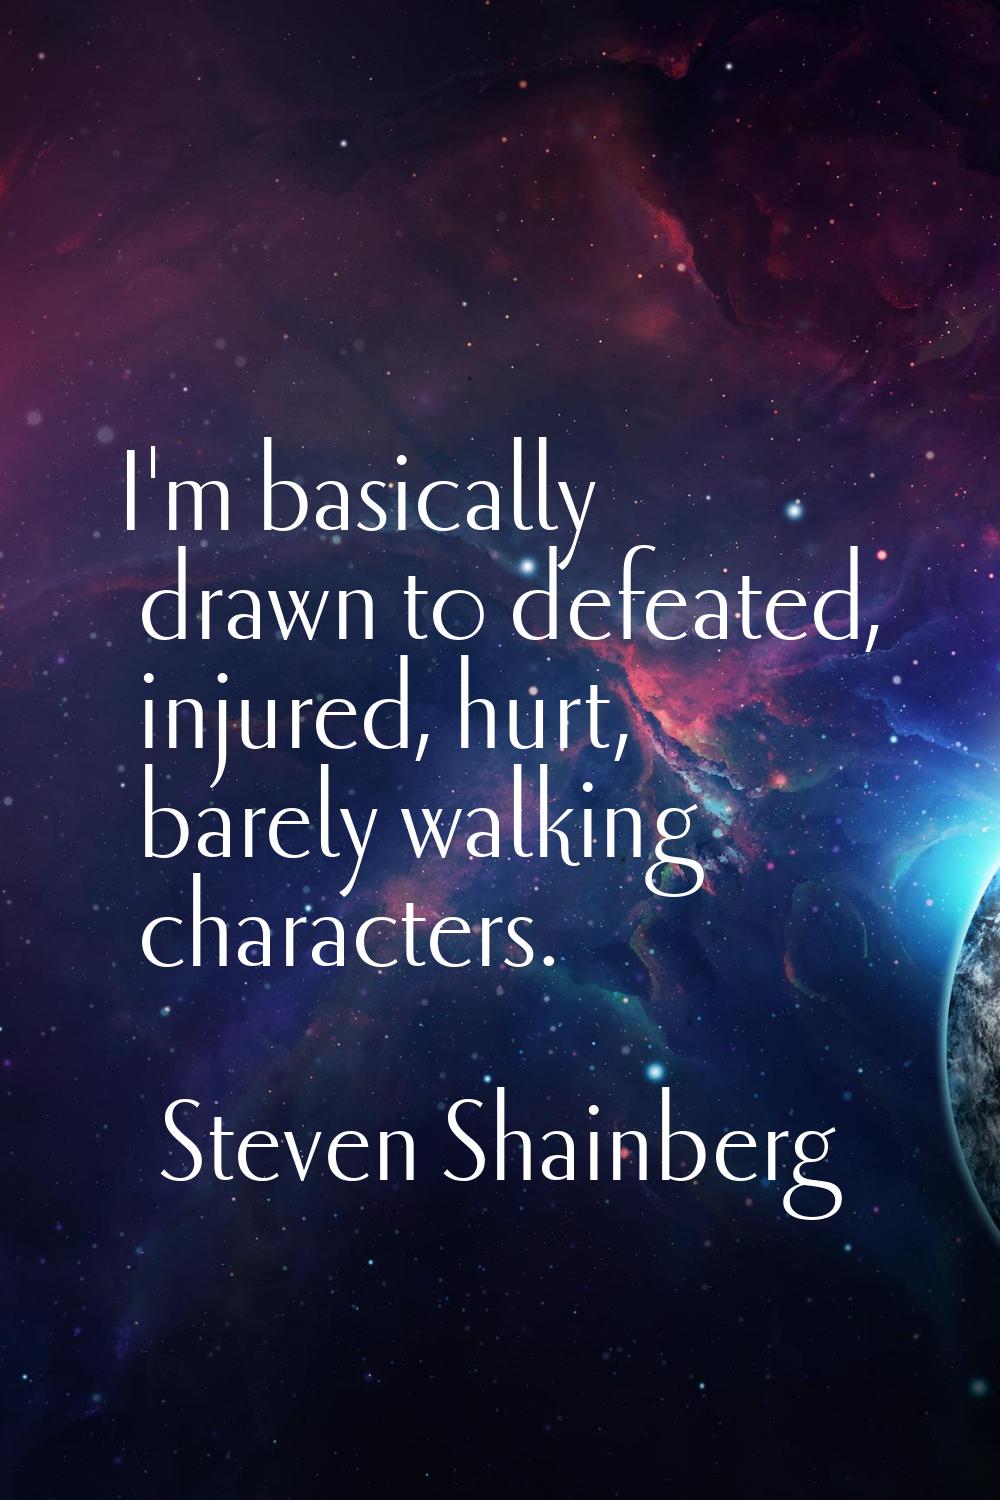 I'm basically drawn to defeated, injured, hurt, barely walking characters.